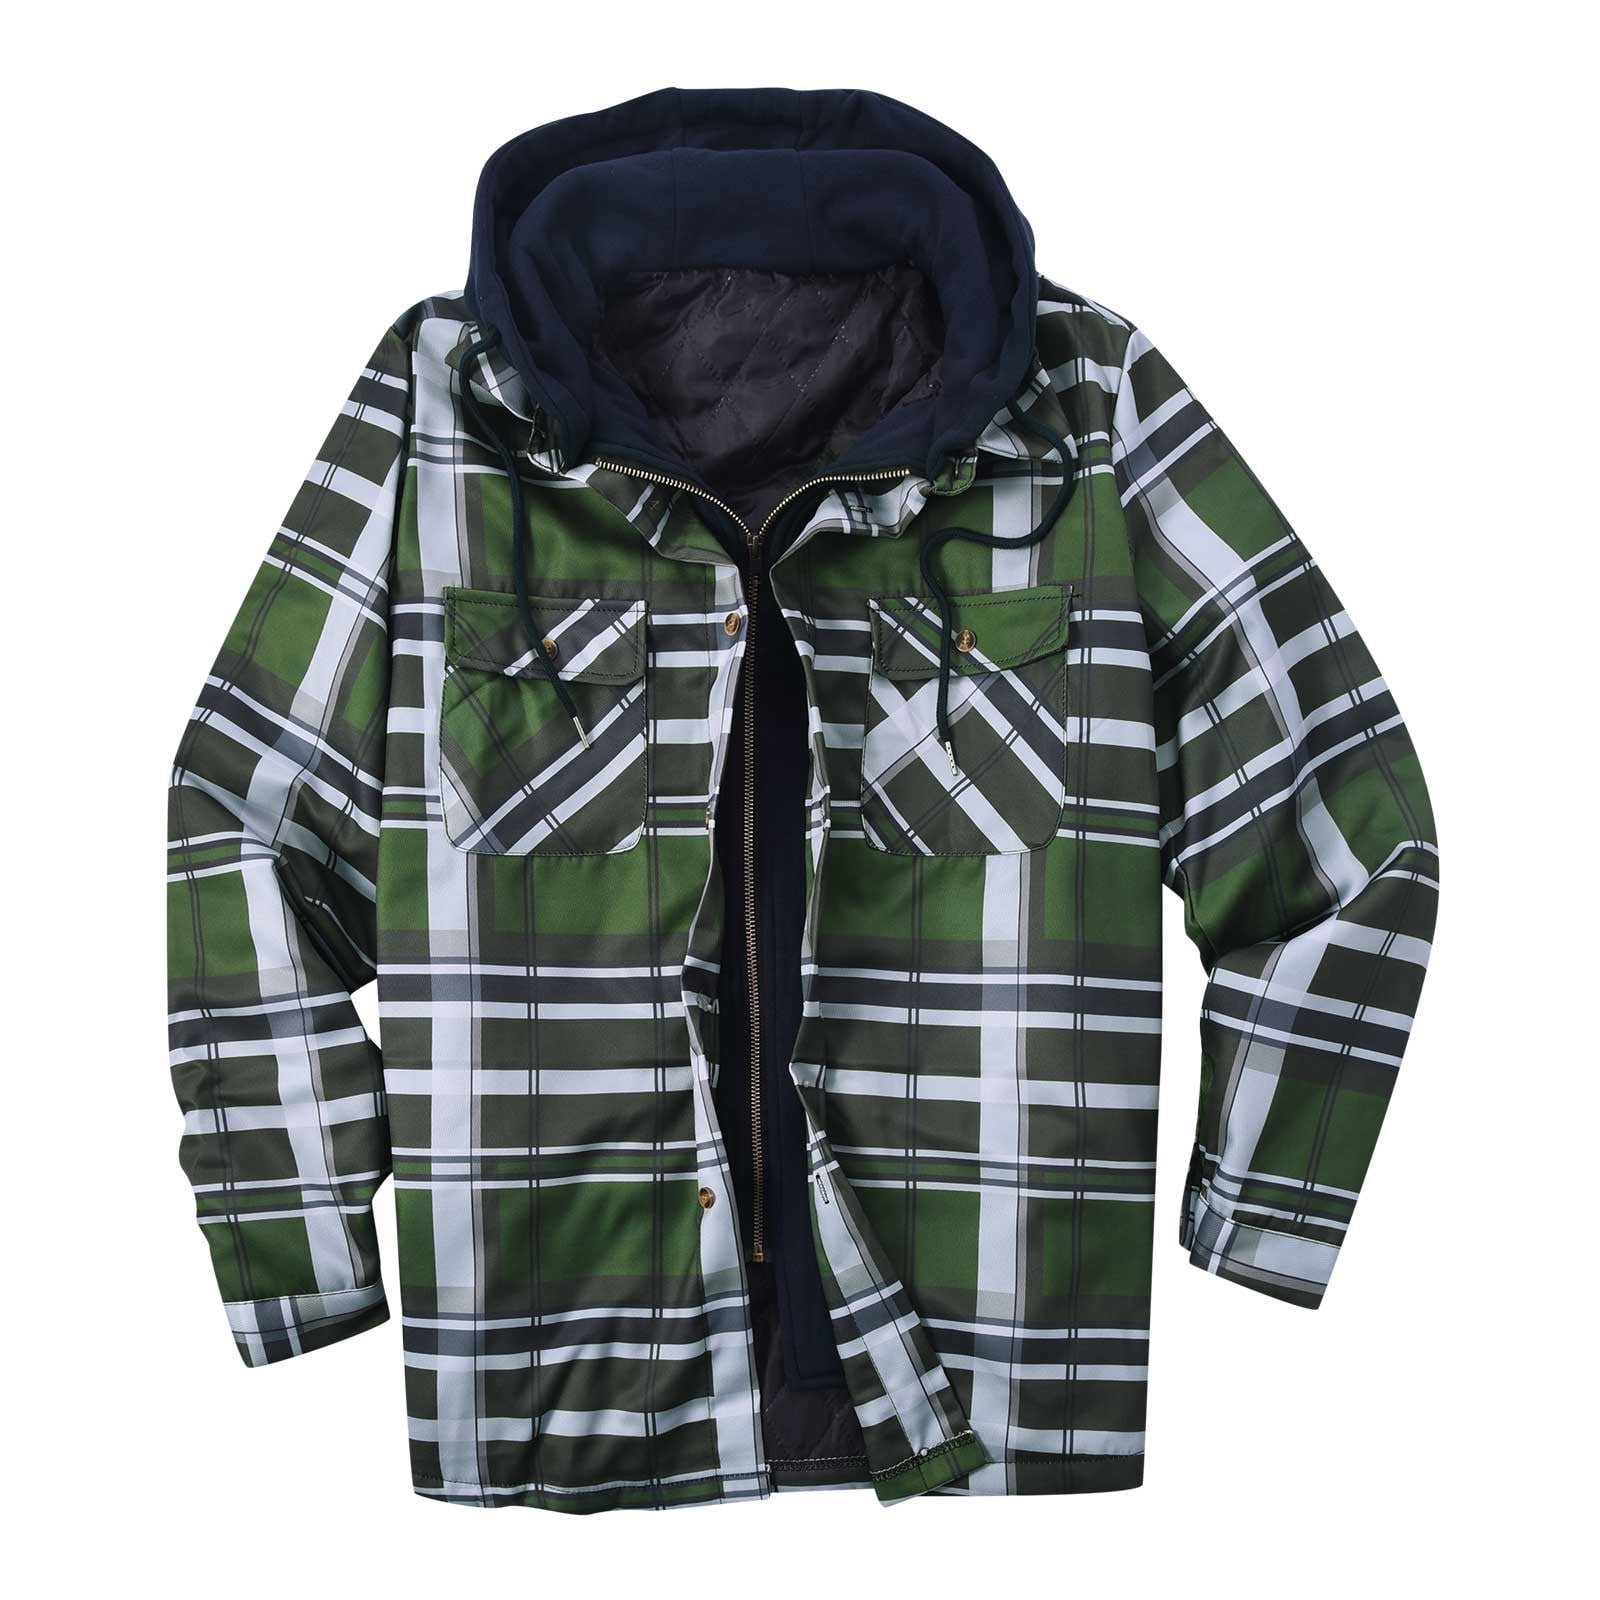 YYDGH Men's Flannel Plaid Shirt Jacket Winter Warm Long Sleeve Quilted  Lined Plaid Drawstring Coats Soft Button Down Thick Shirts with Hood Army  Green S 